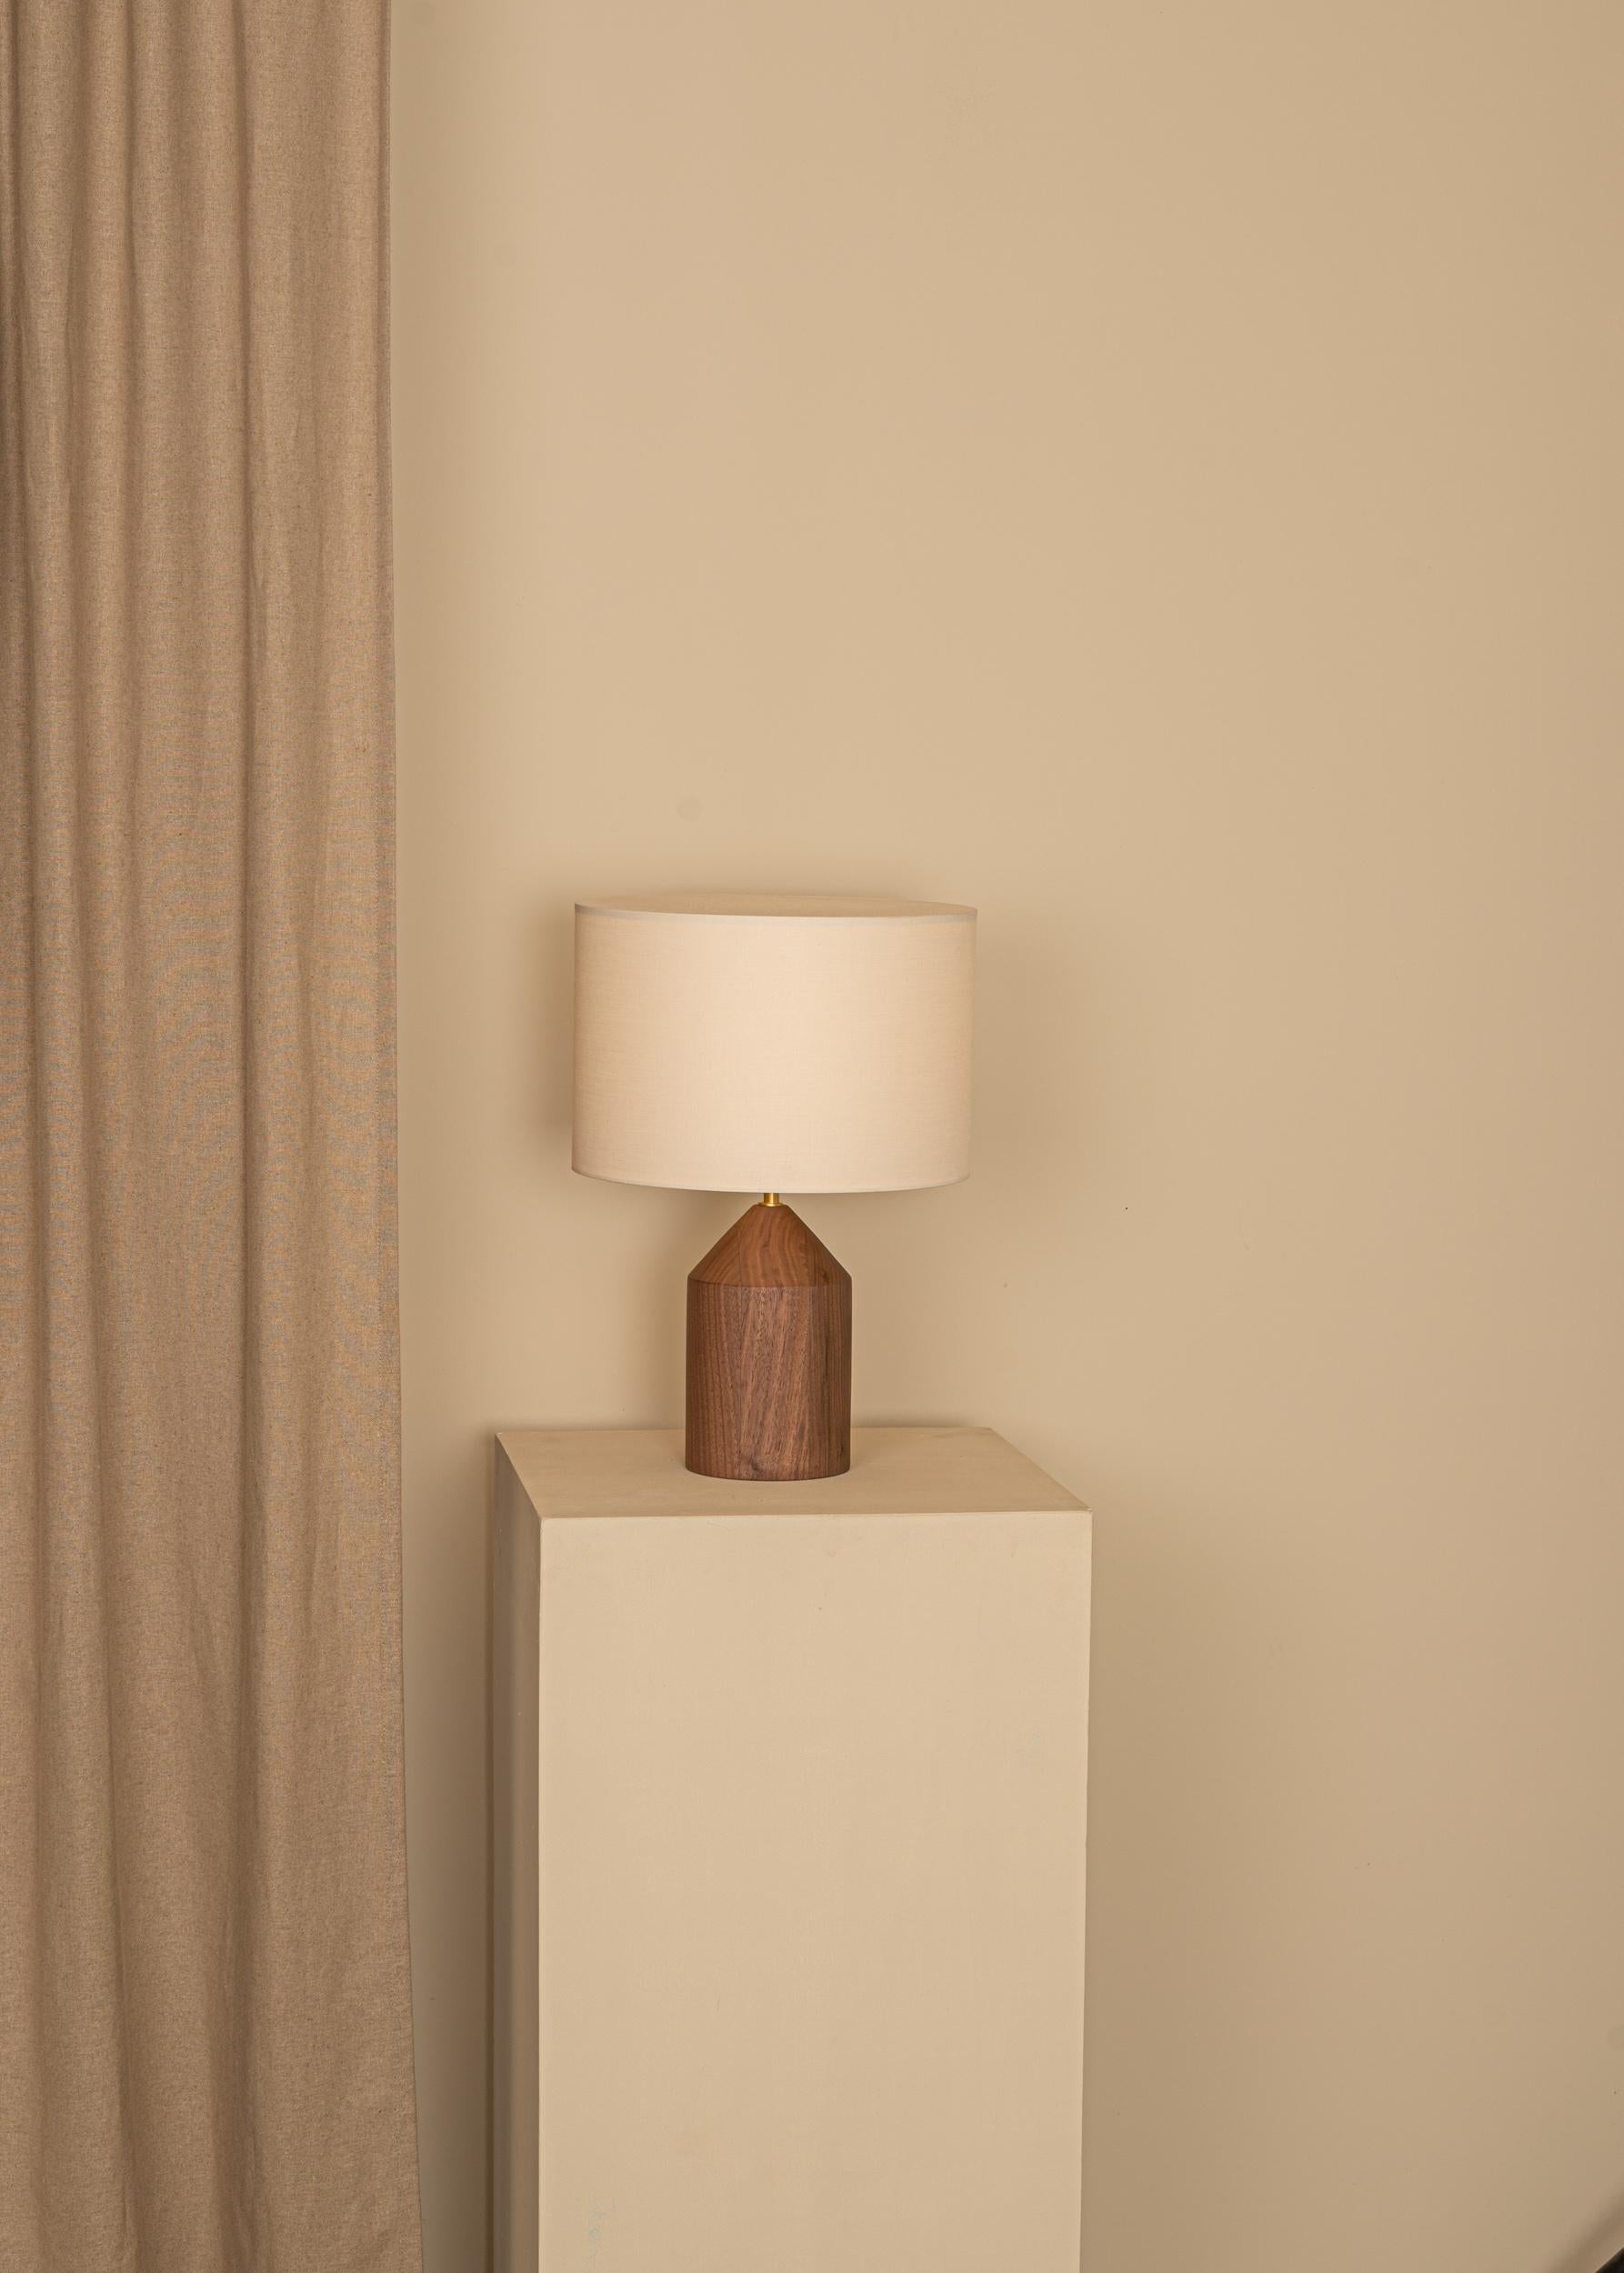 Walnut Josef Table Lamp by Simone & Marcel
Dimensions: Ø 30 x H 41.5 cm.
Materials: Brass, cotton and walnut.

Also available in different marble, wood and alabaster options and finishes. Custom options available on request. Please contact us. 

All